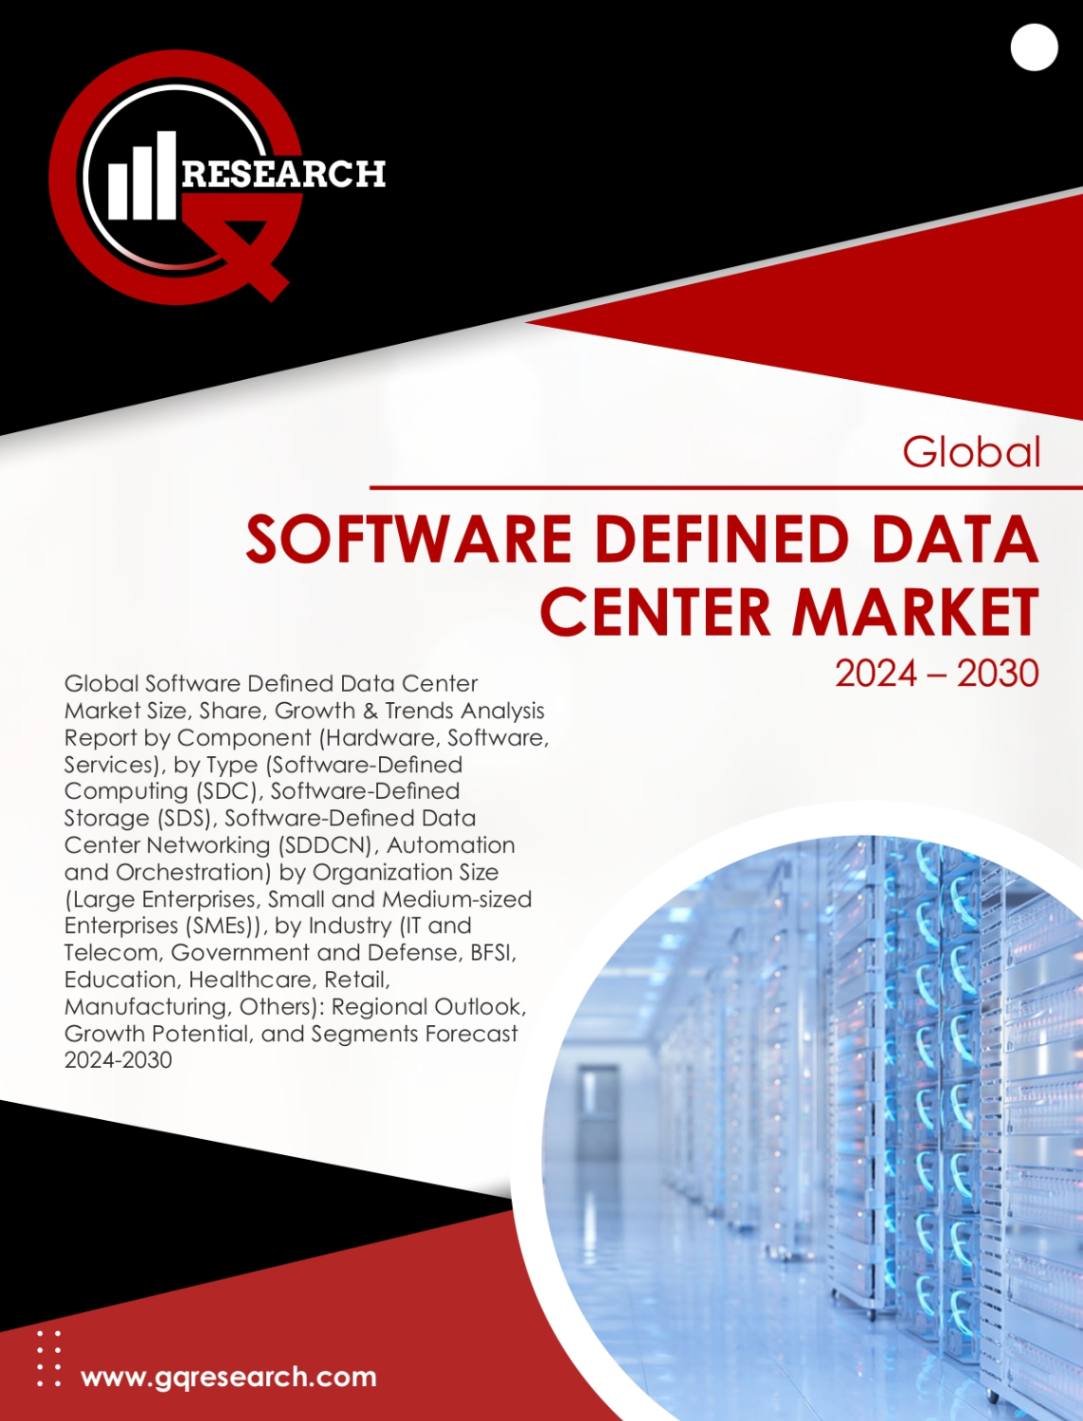 Software Defined Data Center Market Growth Analysis by Size, Share & Forecast to 2030 | GQ Research